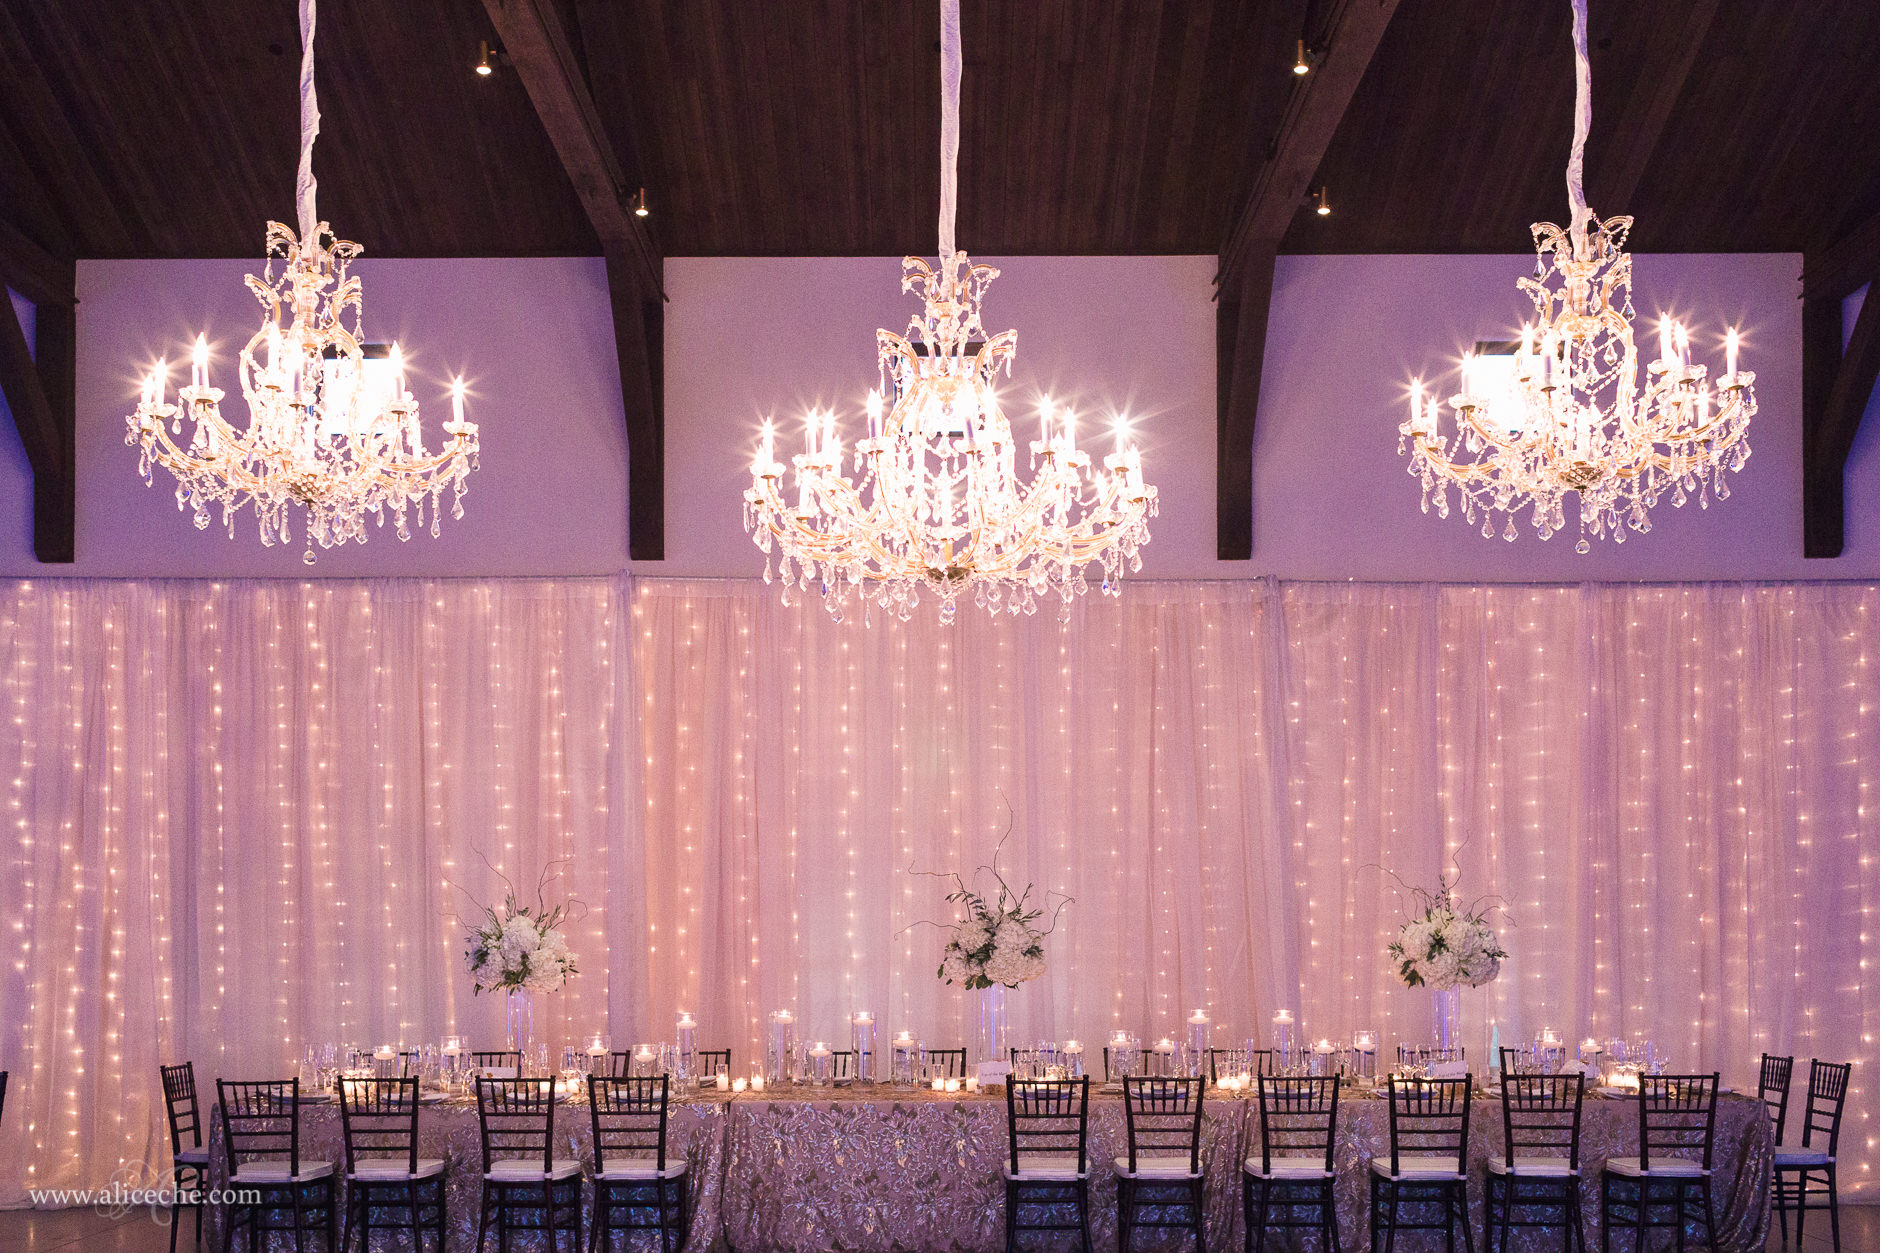 Viansa Winery Sonoma Wedding Gorgeous Chandeliers and Sweetheart Table